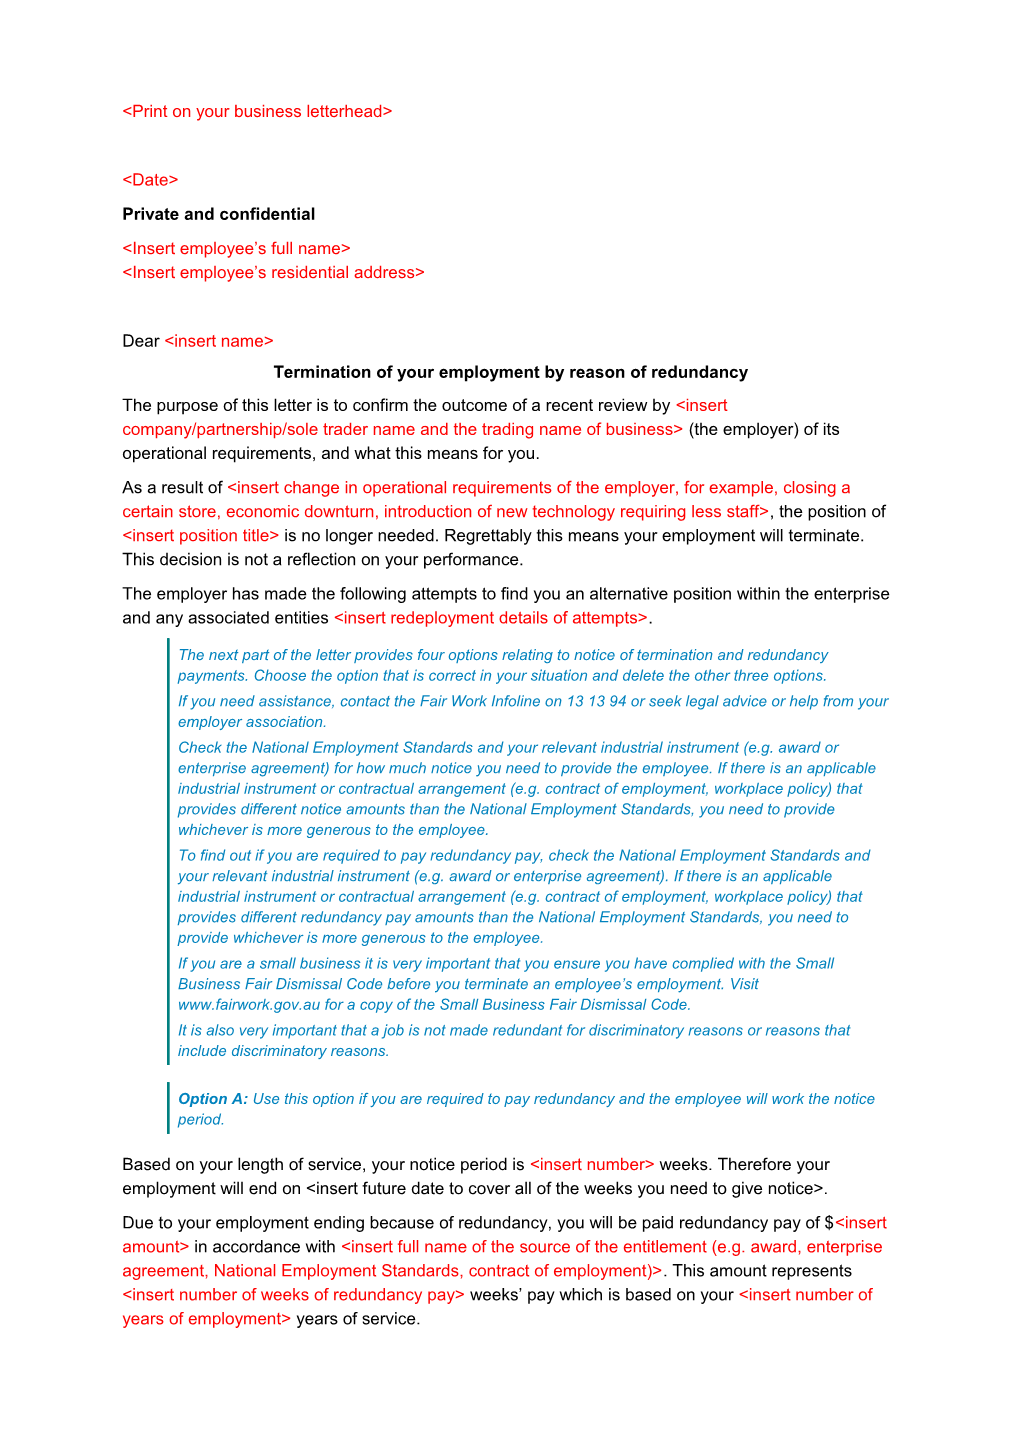 Letter of Termination of Employment (Redundancy) Template